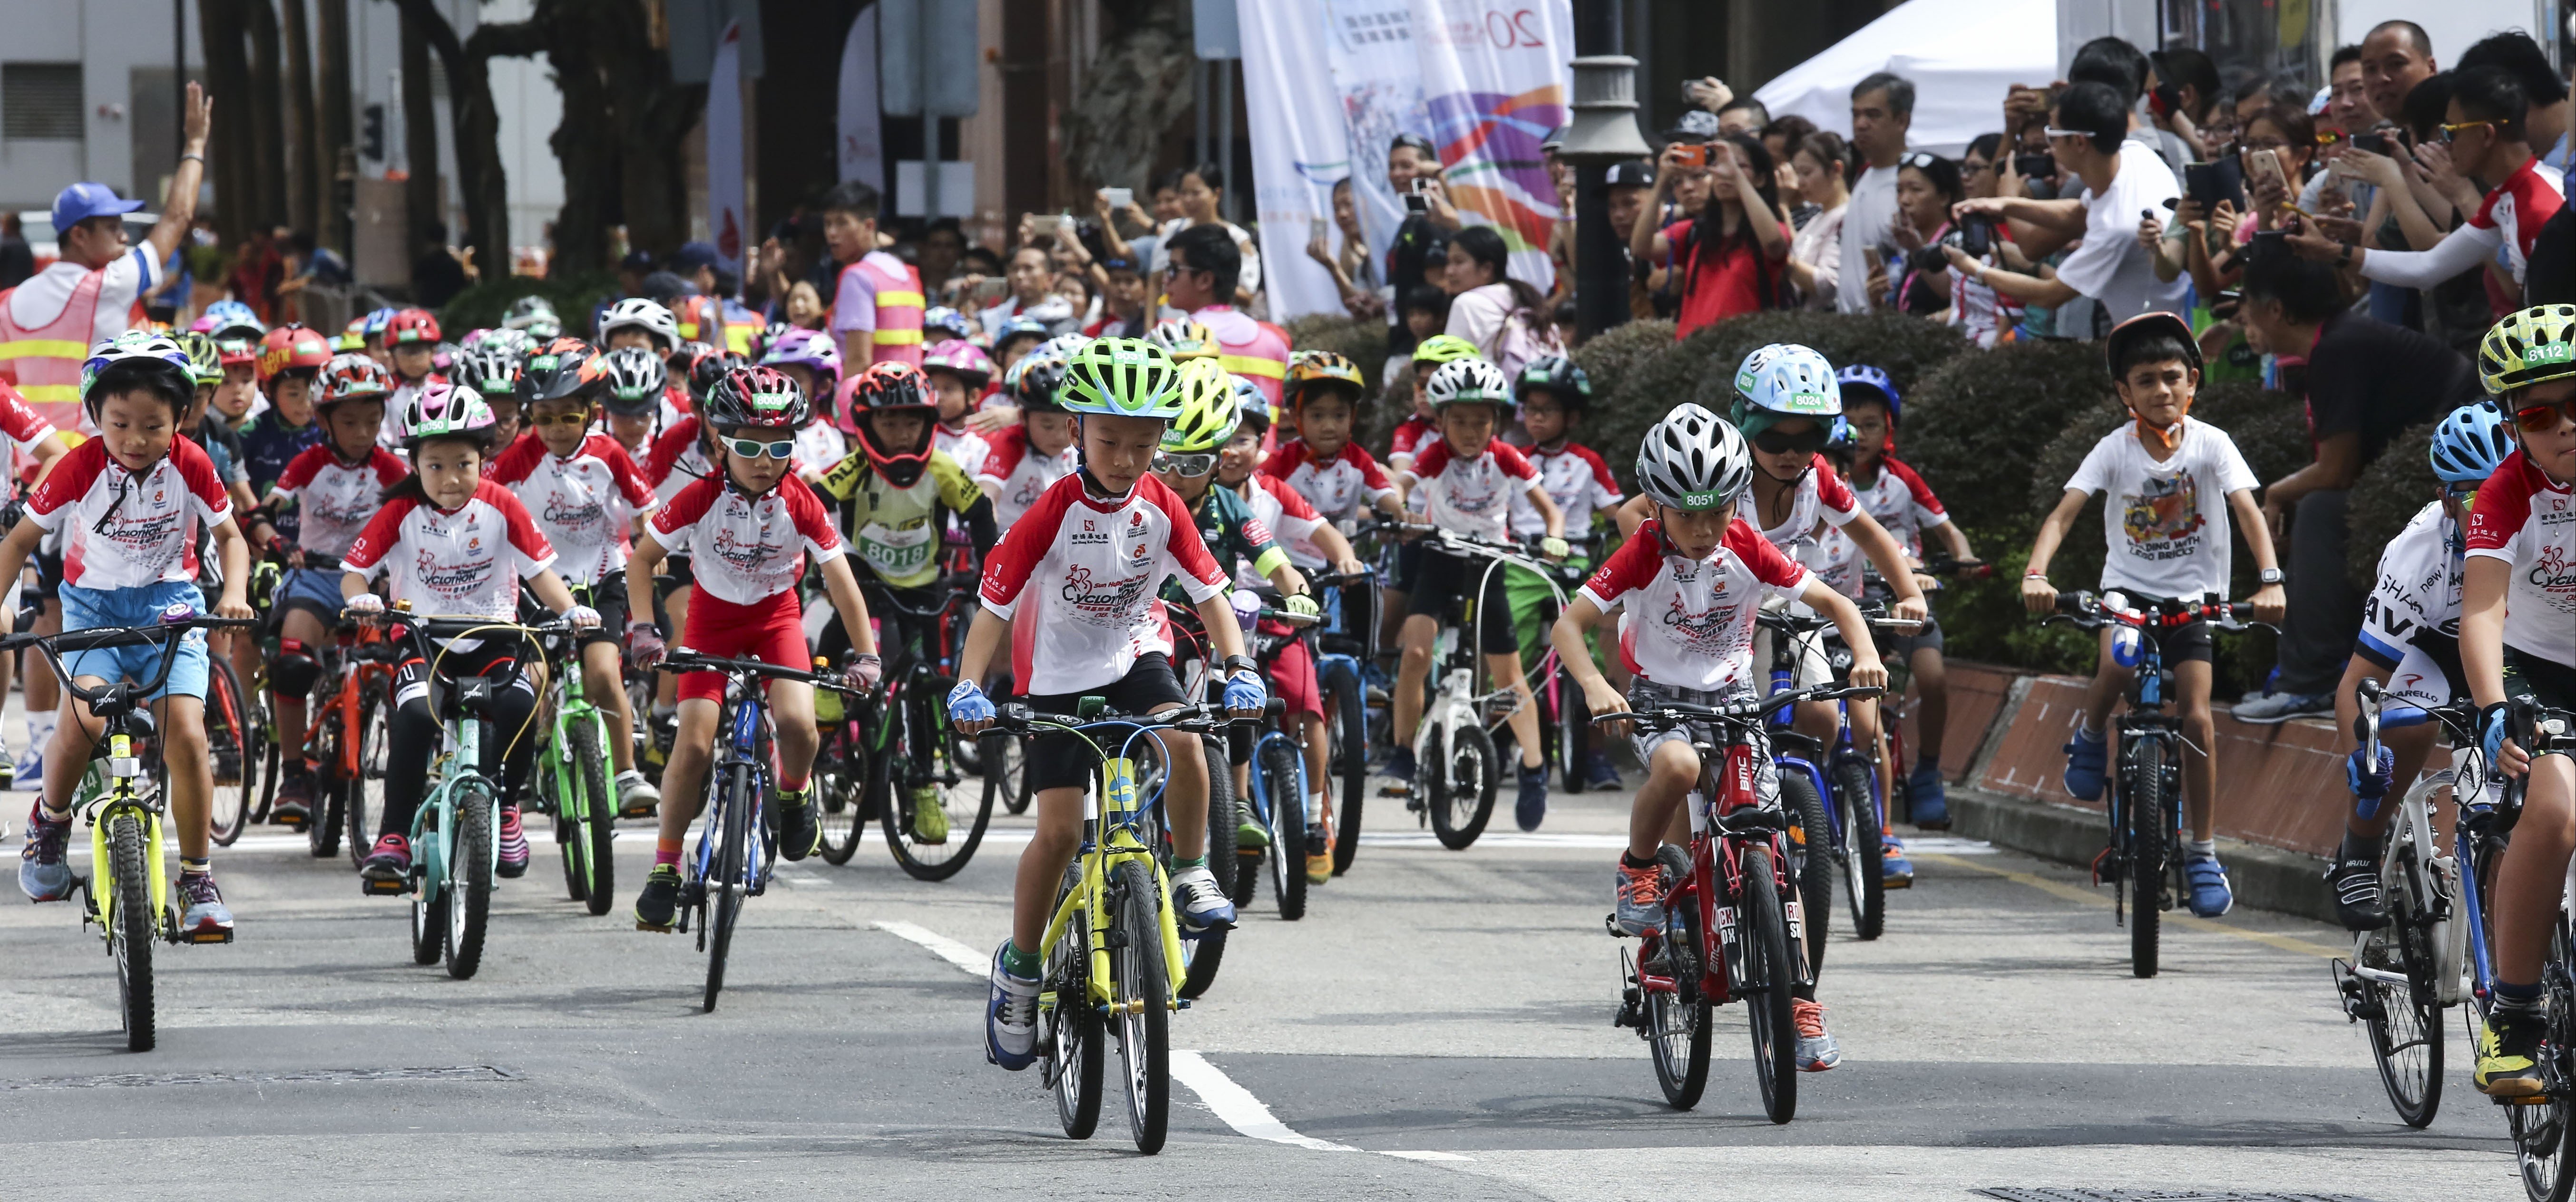 Young riders compete in the Kids and Youth Rides event in Tsim Sha Tsui as part of Sunday’s cyclothon. Photo: Jonathan Wong